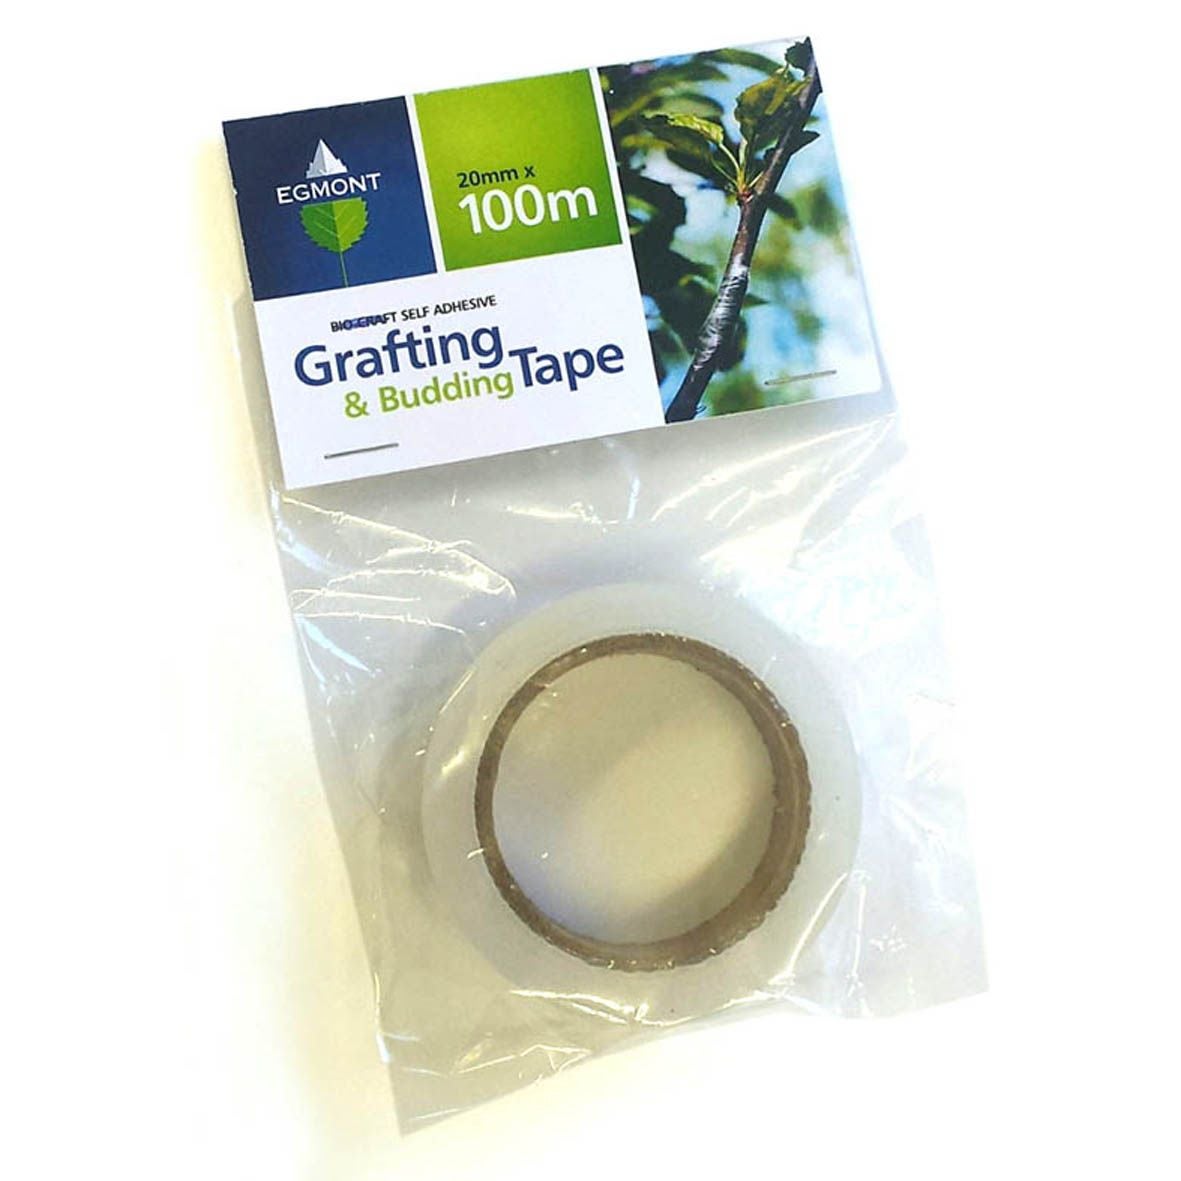 Buddy Tape - Perforated Budding/Grafting Tape - Plant Tying/Grafting -  Orchard & Nursery